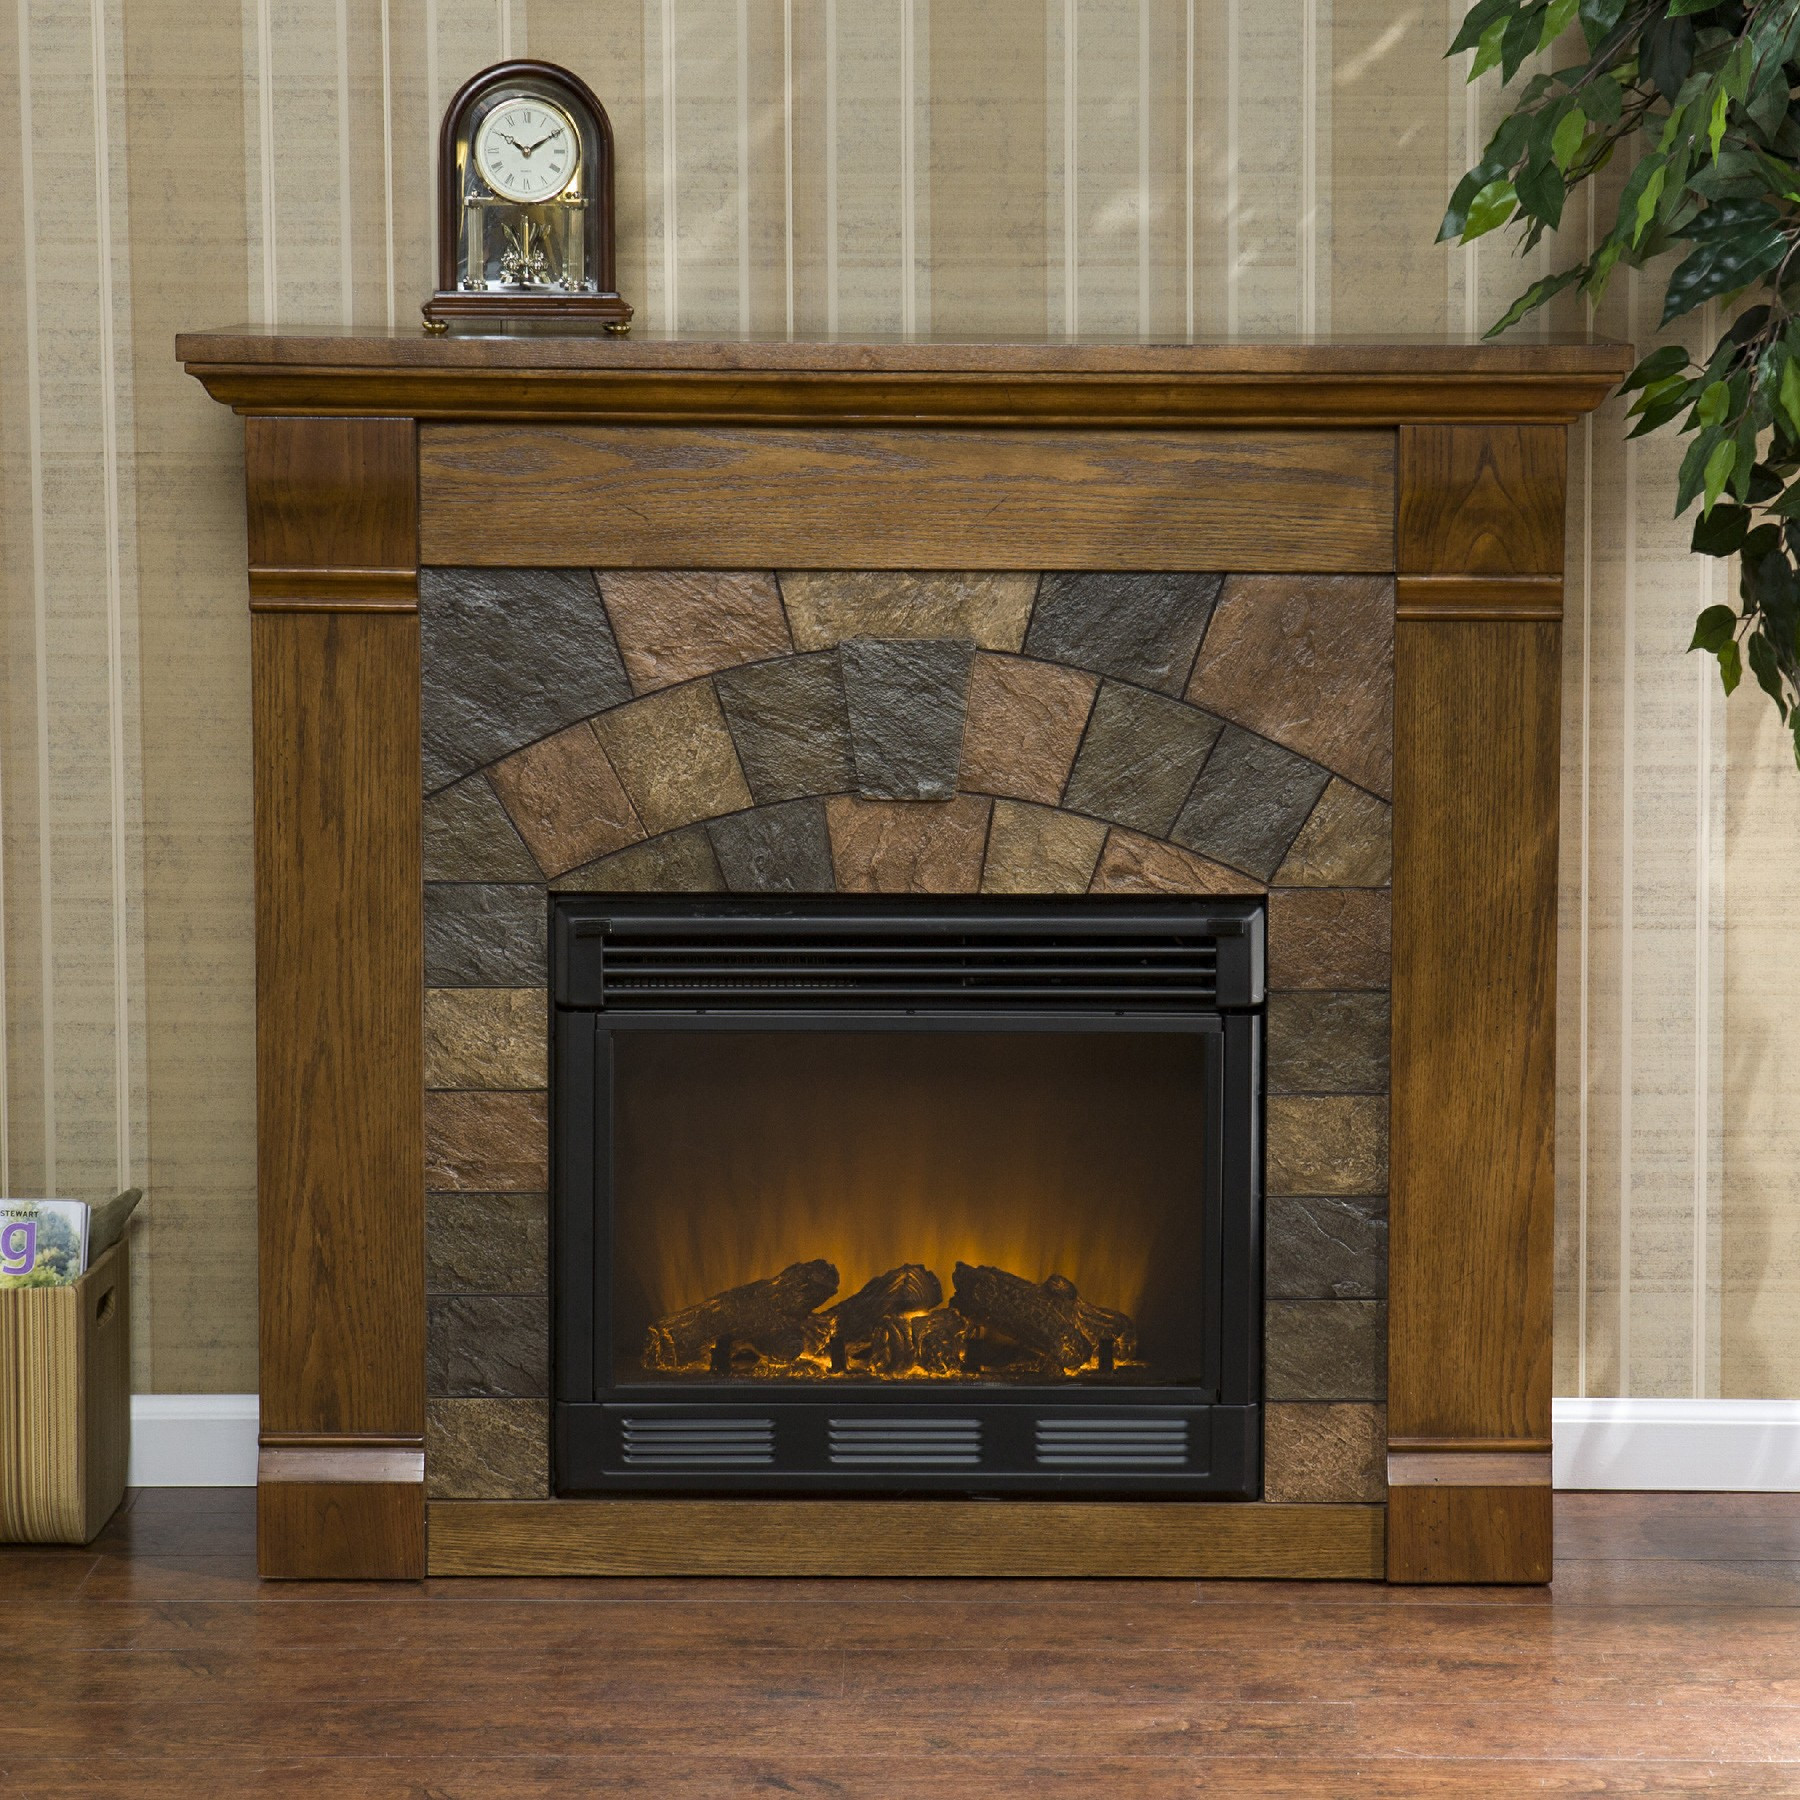 Corner Electric Fireplace Lowes
 Fireplaces Creating A Living Environment With Beautiful